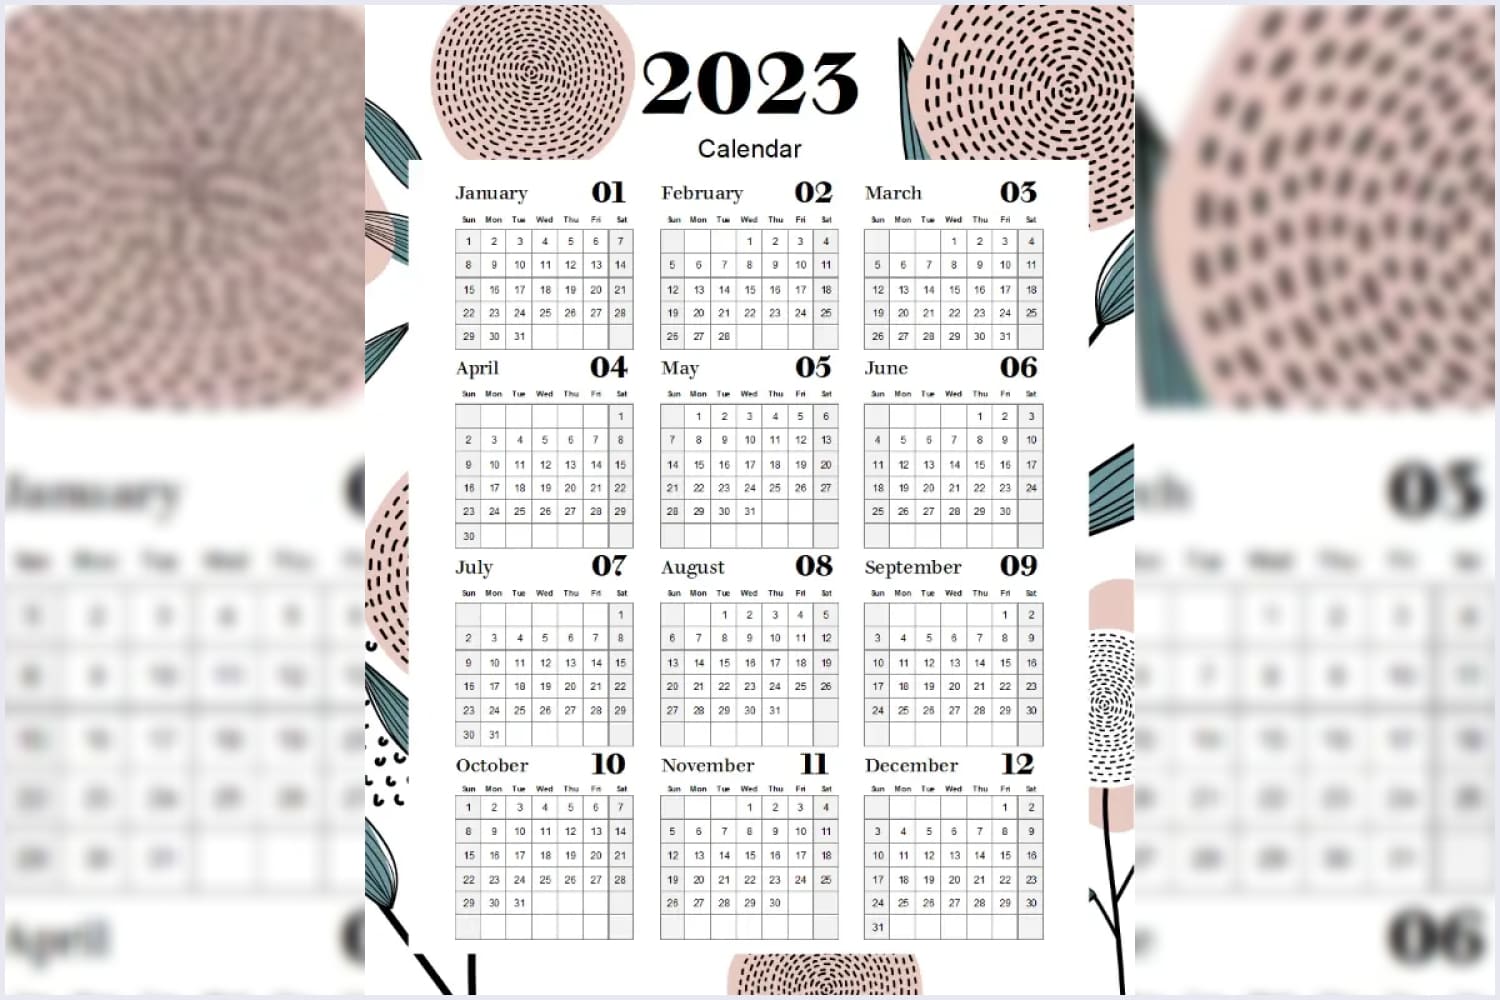 Image of a calendar for 2023 in the form of month plates.